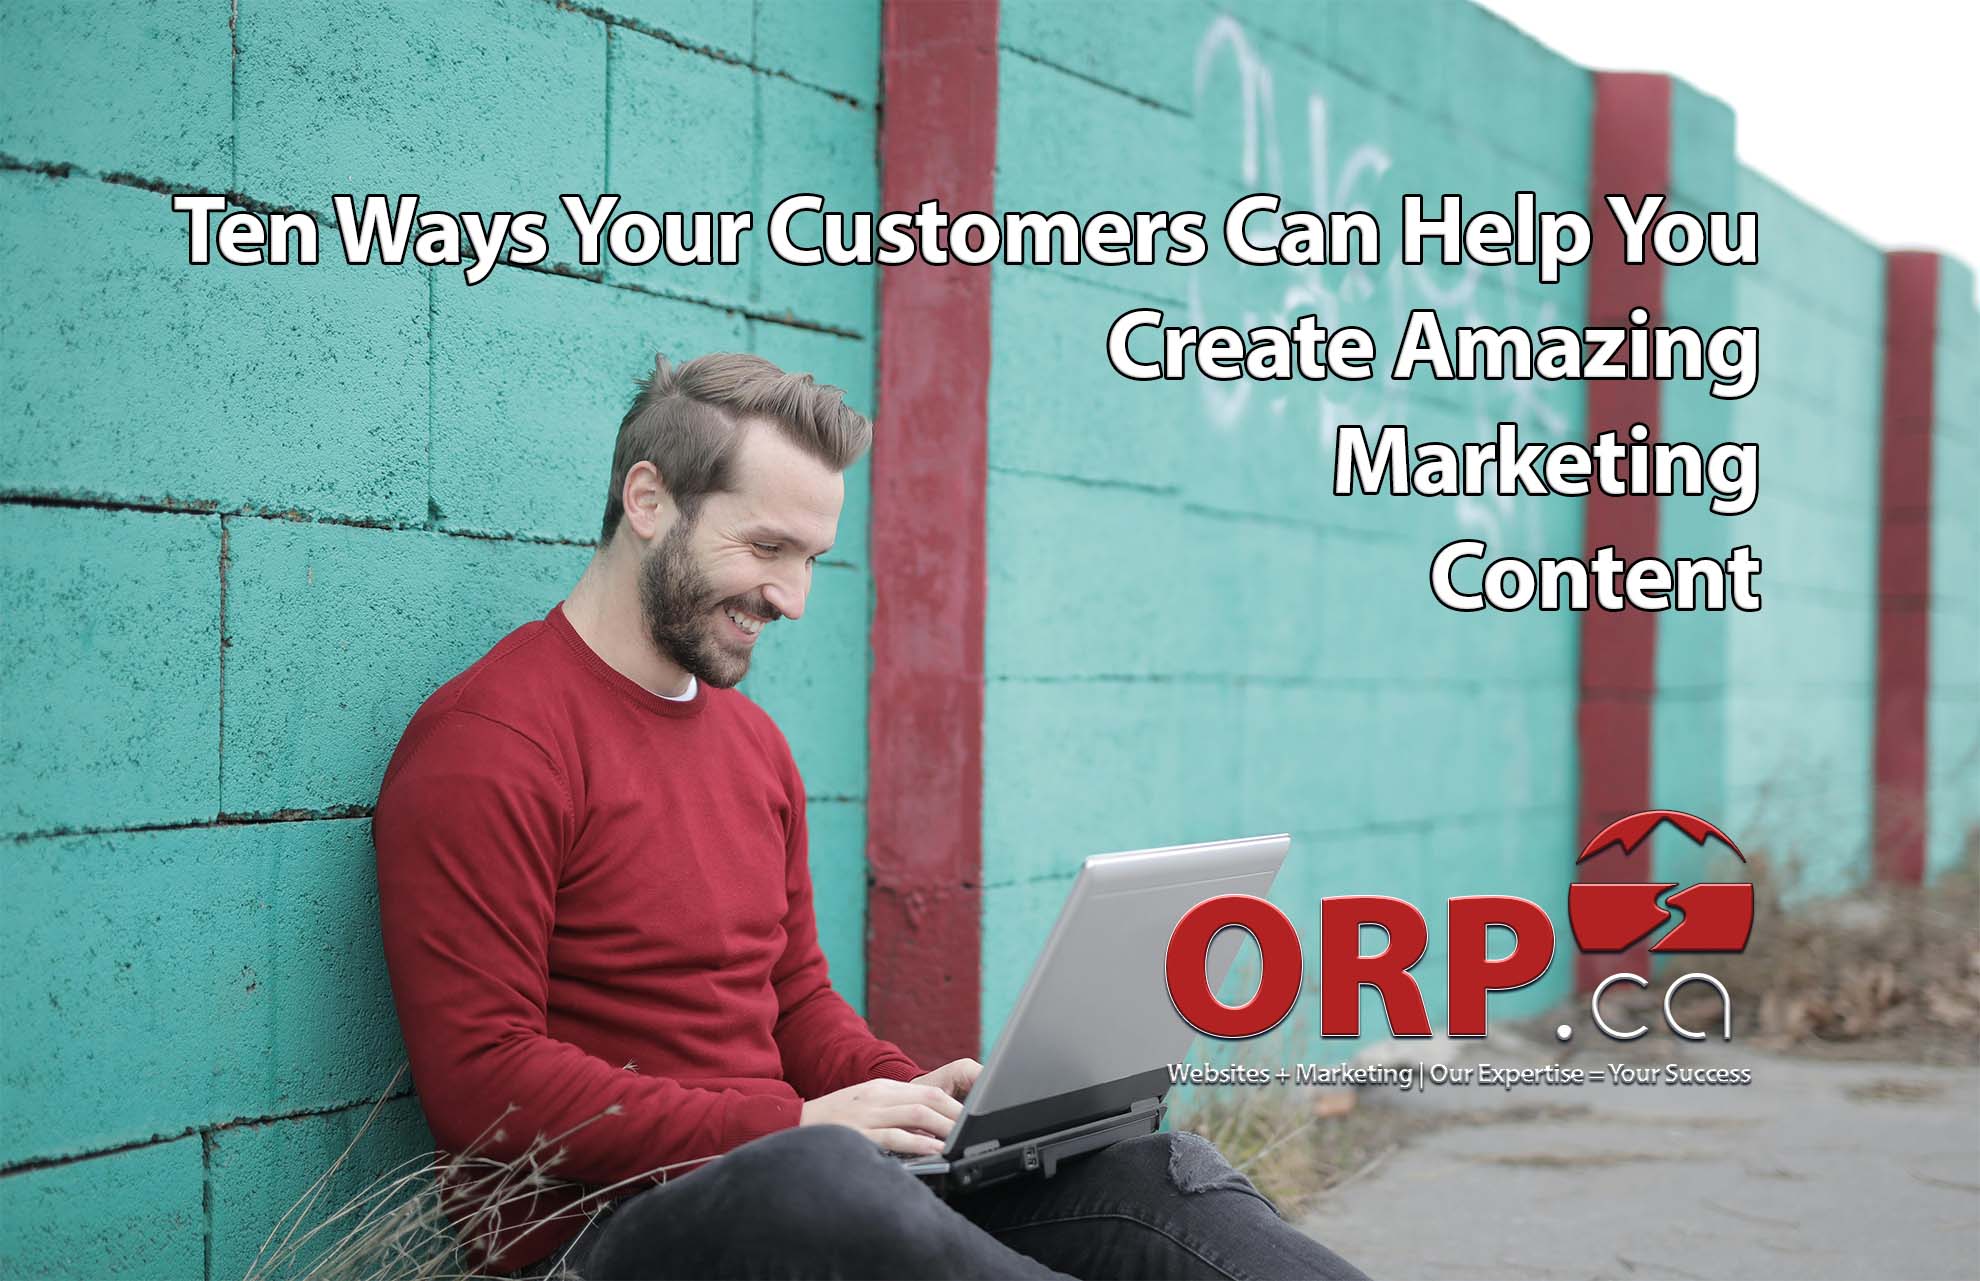 Ten Ways Your Customers Can Help You Create Amazing Marketing Content a small business website redesign article by ORP.ca, Your Small Business Website and Digital Marketing Services Provider